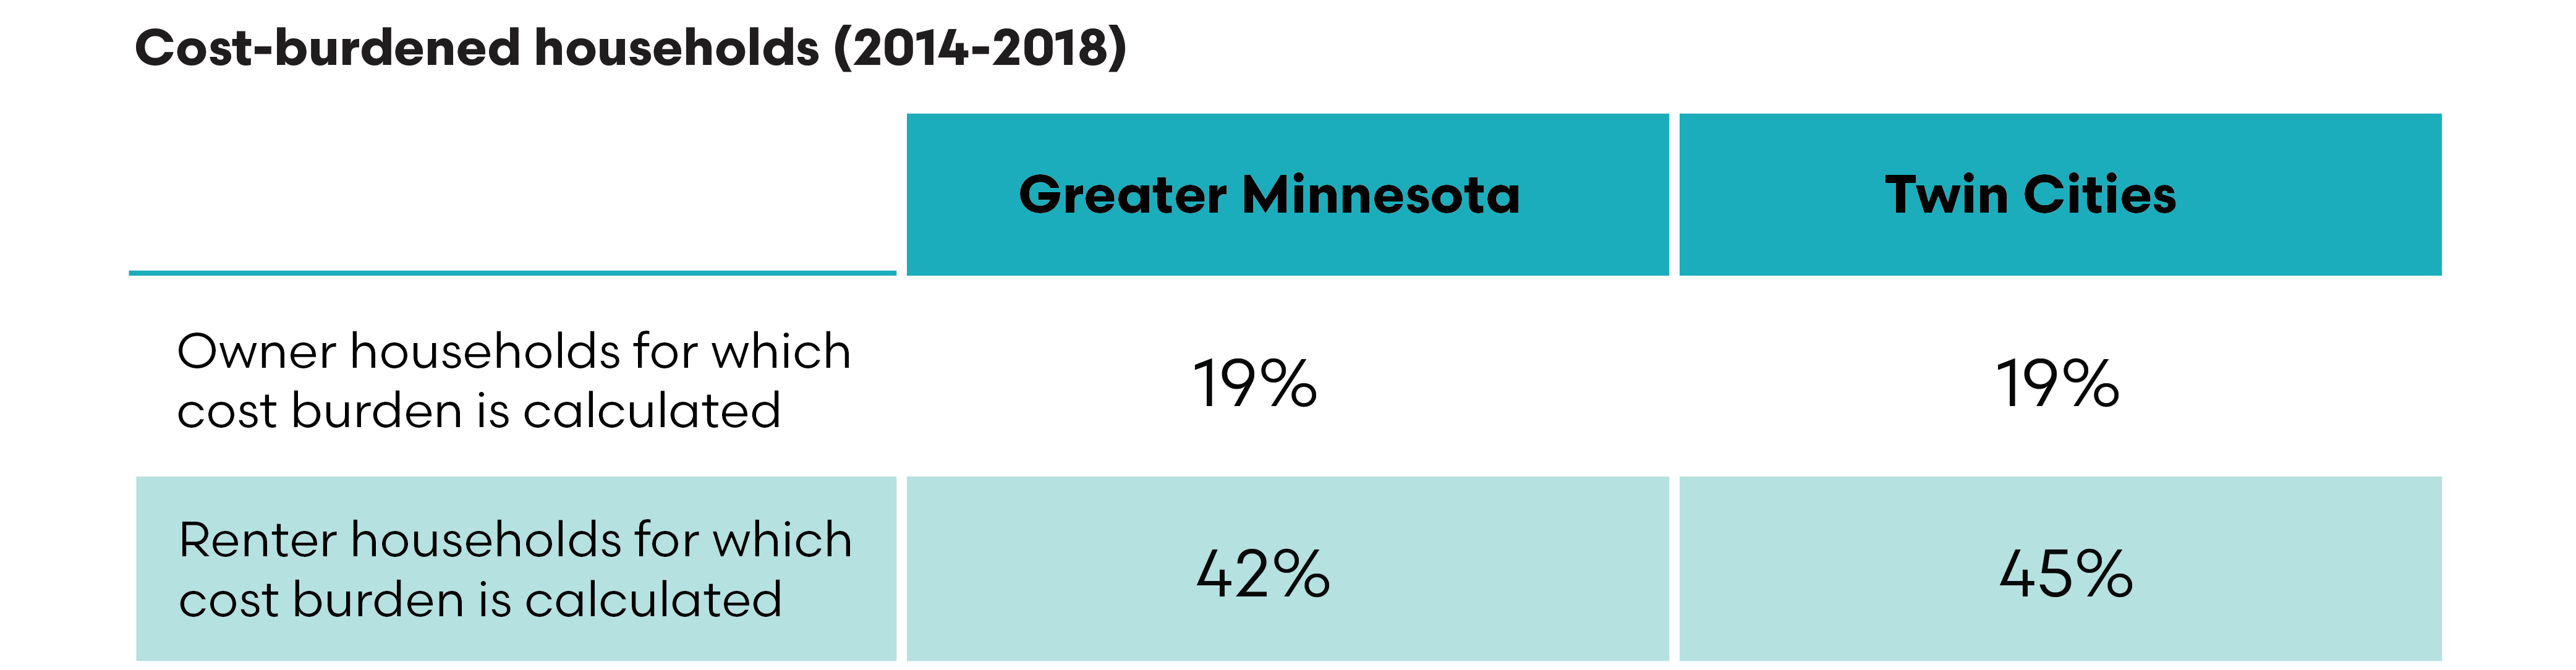 Table comparing cost-burdened households in Greater Minnesota and the Twin Cites